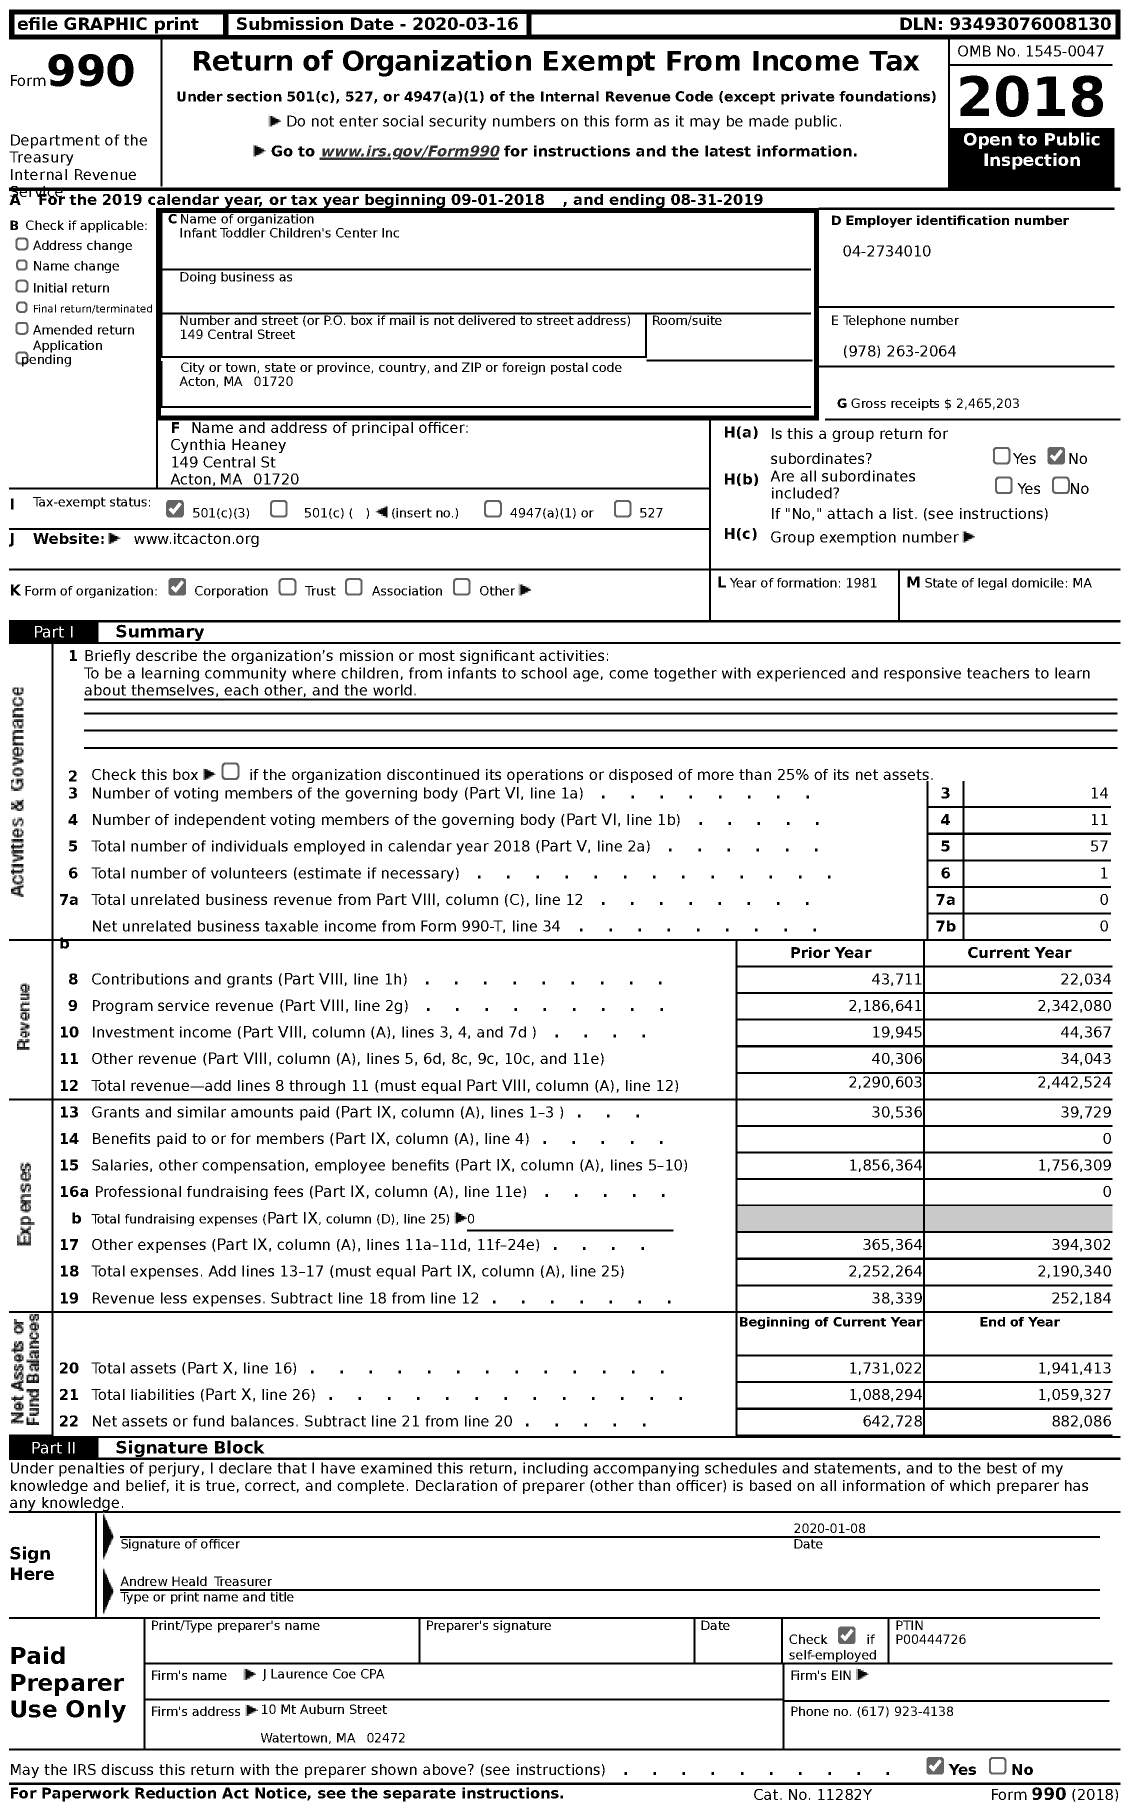 Image of first page of 2018 Form 990 for Infant Toddler Children's Center (ITC)